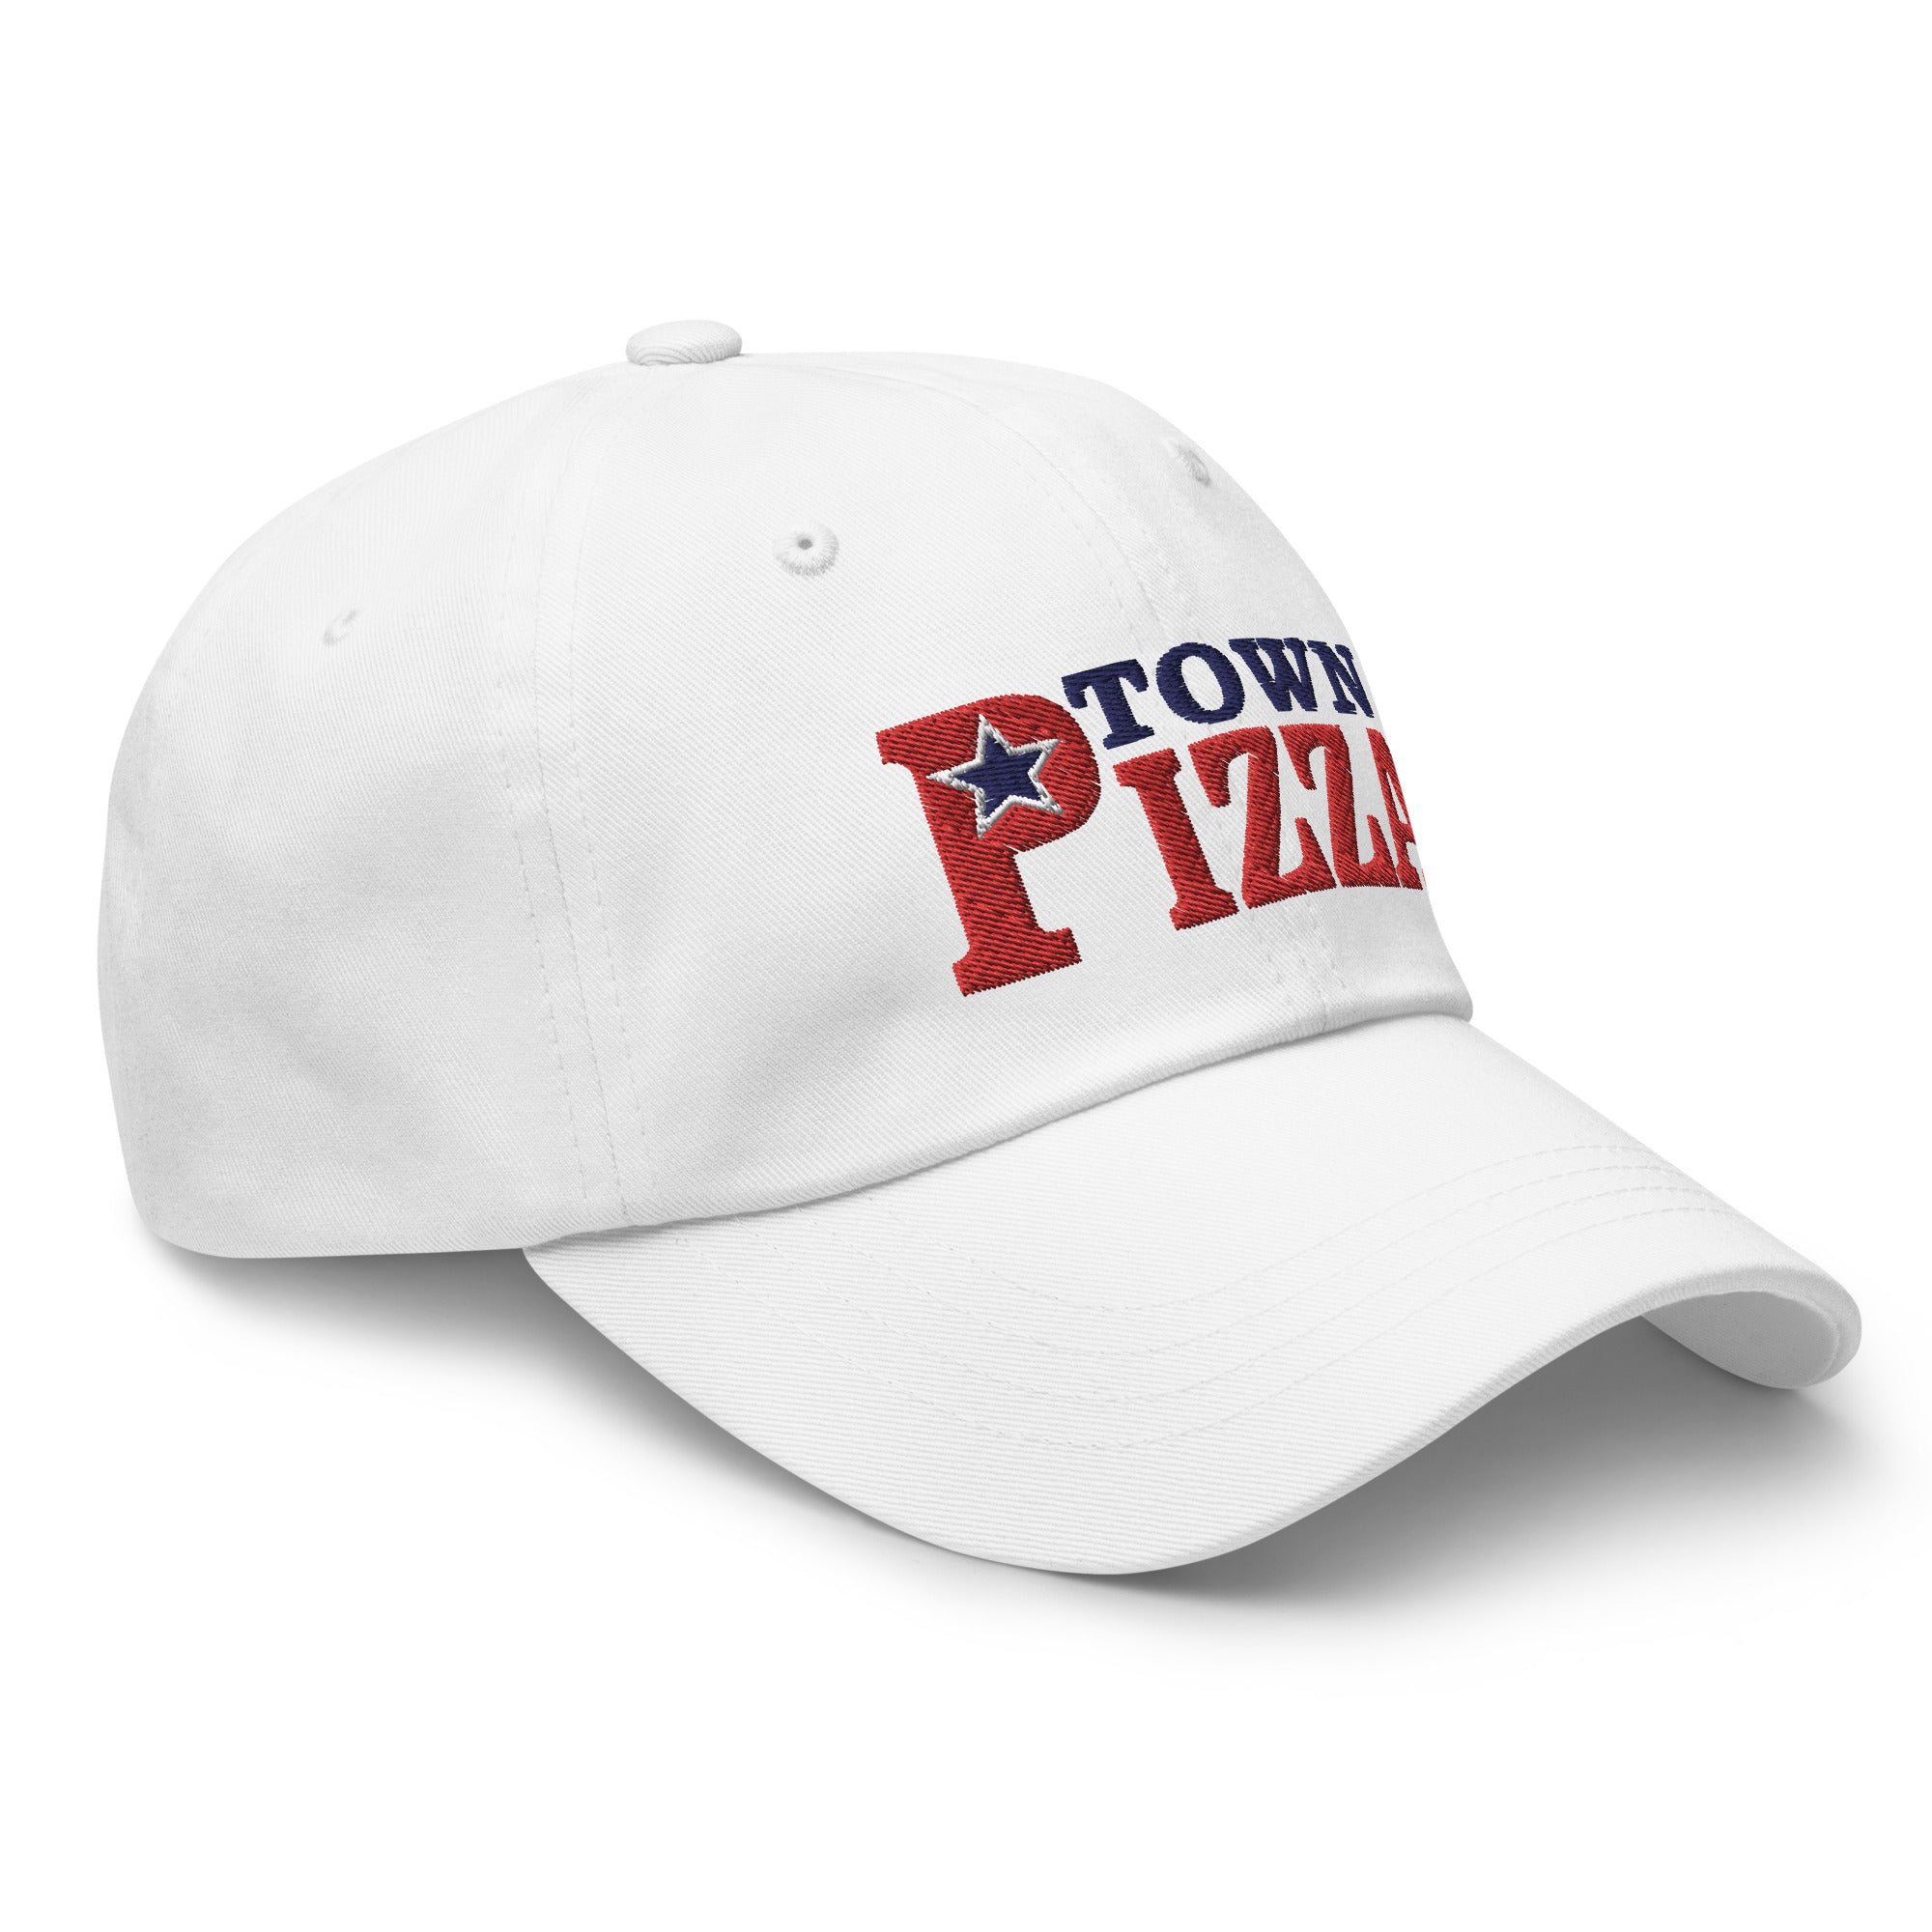 classic-dad-hat-white-right-front-63556b4a1480a.jpg